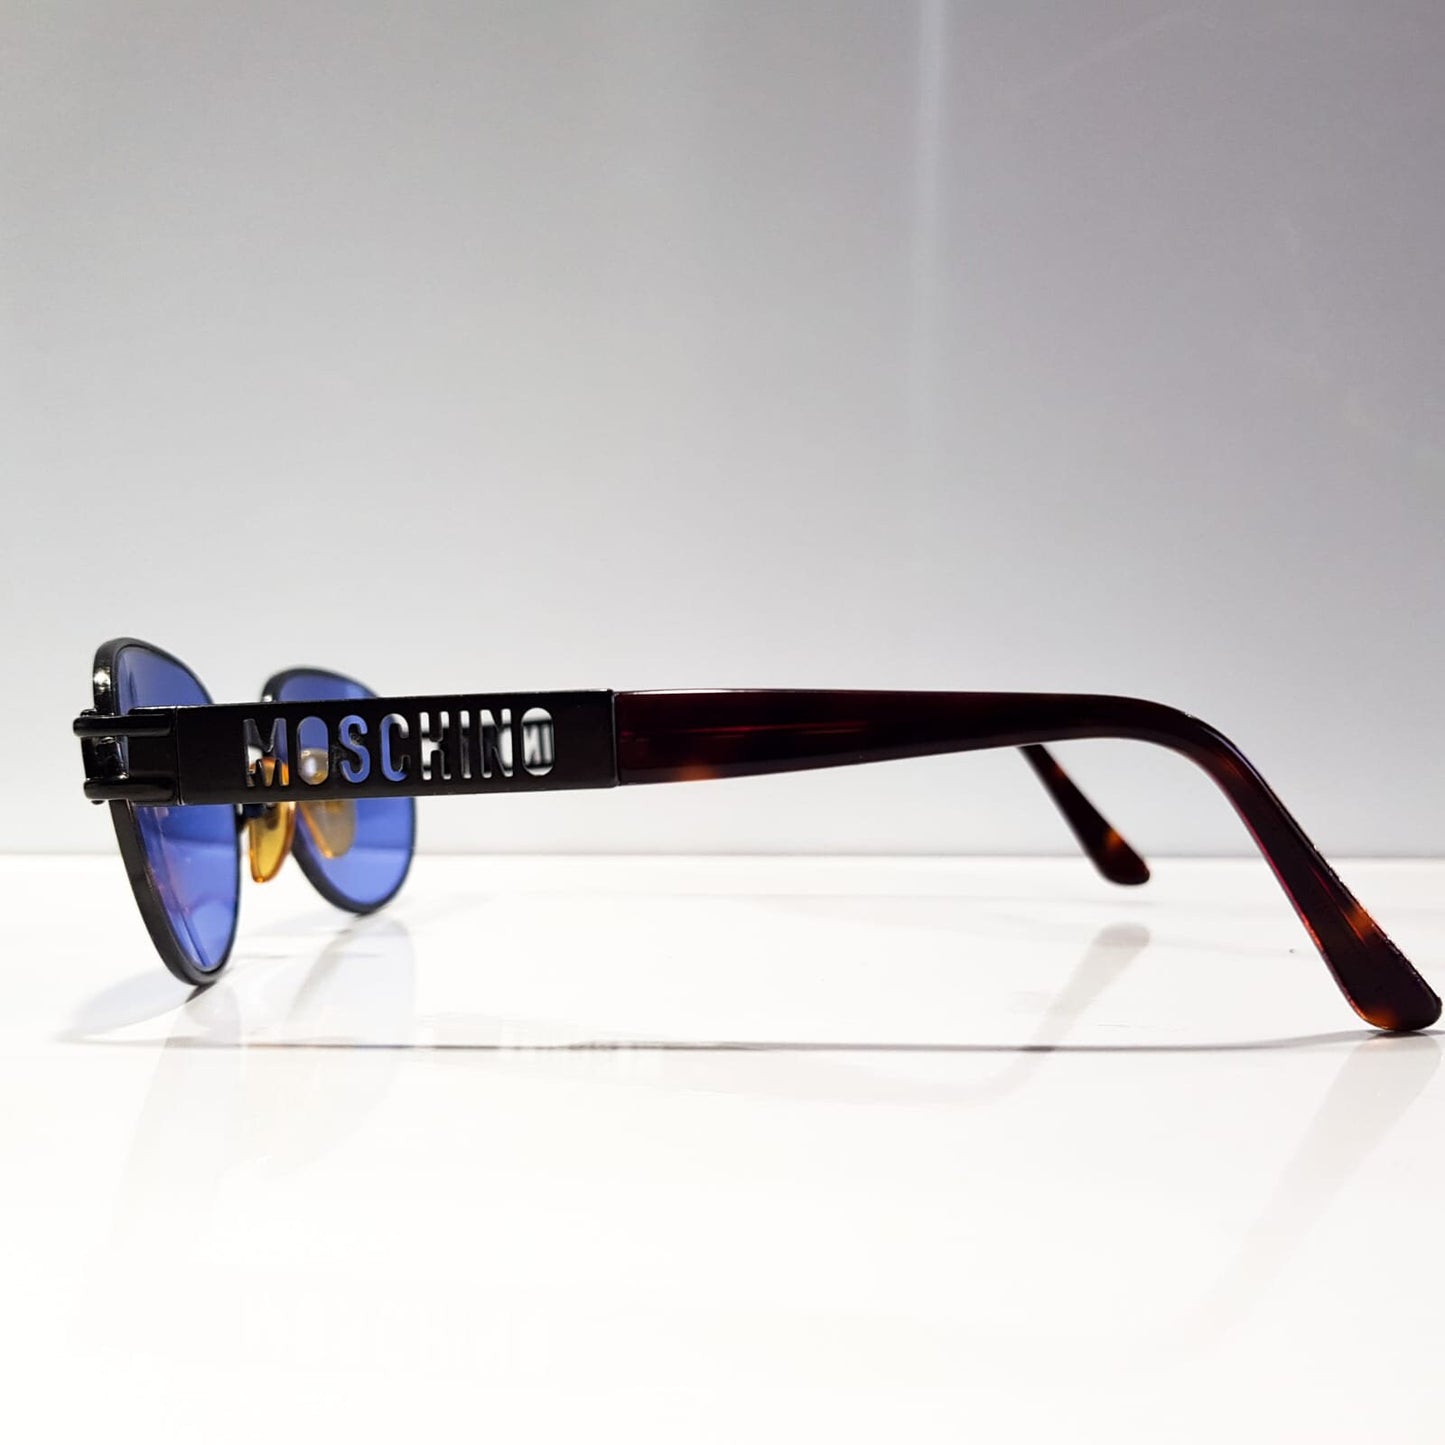 Moschino sunglasses frame italy lunette brille round lens 90s